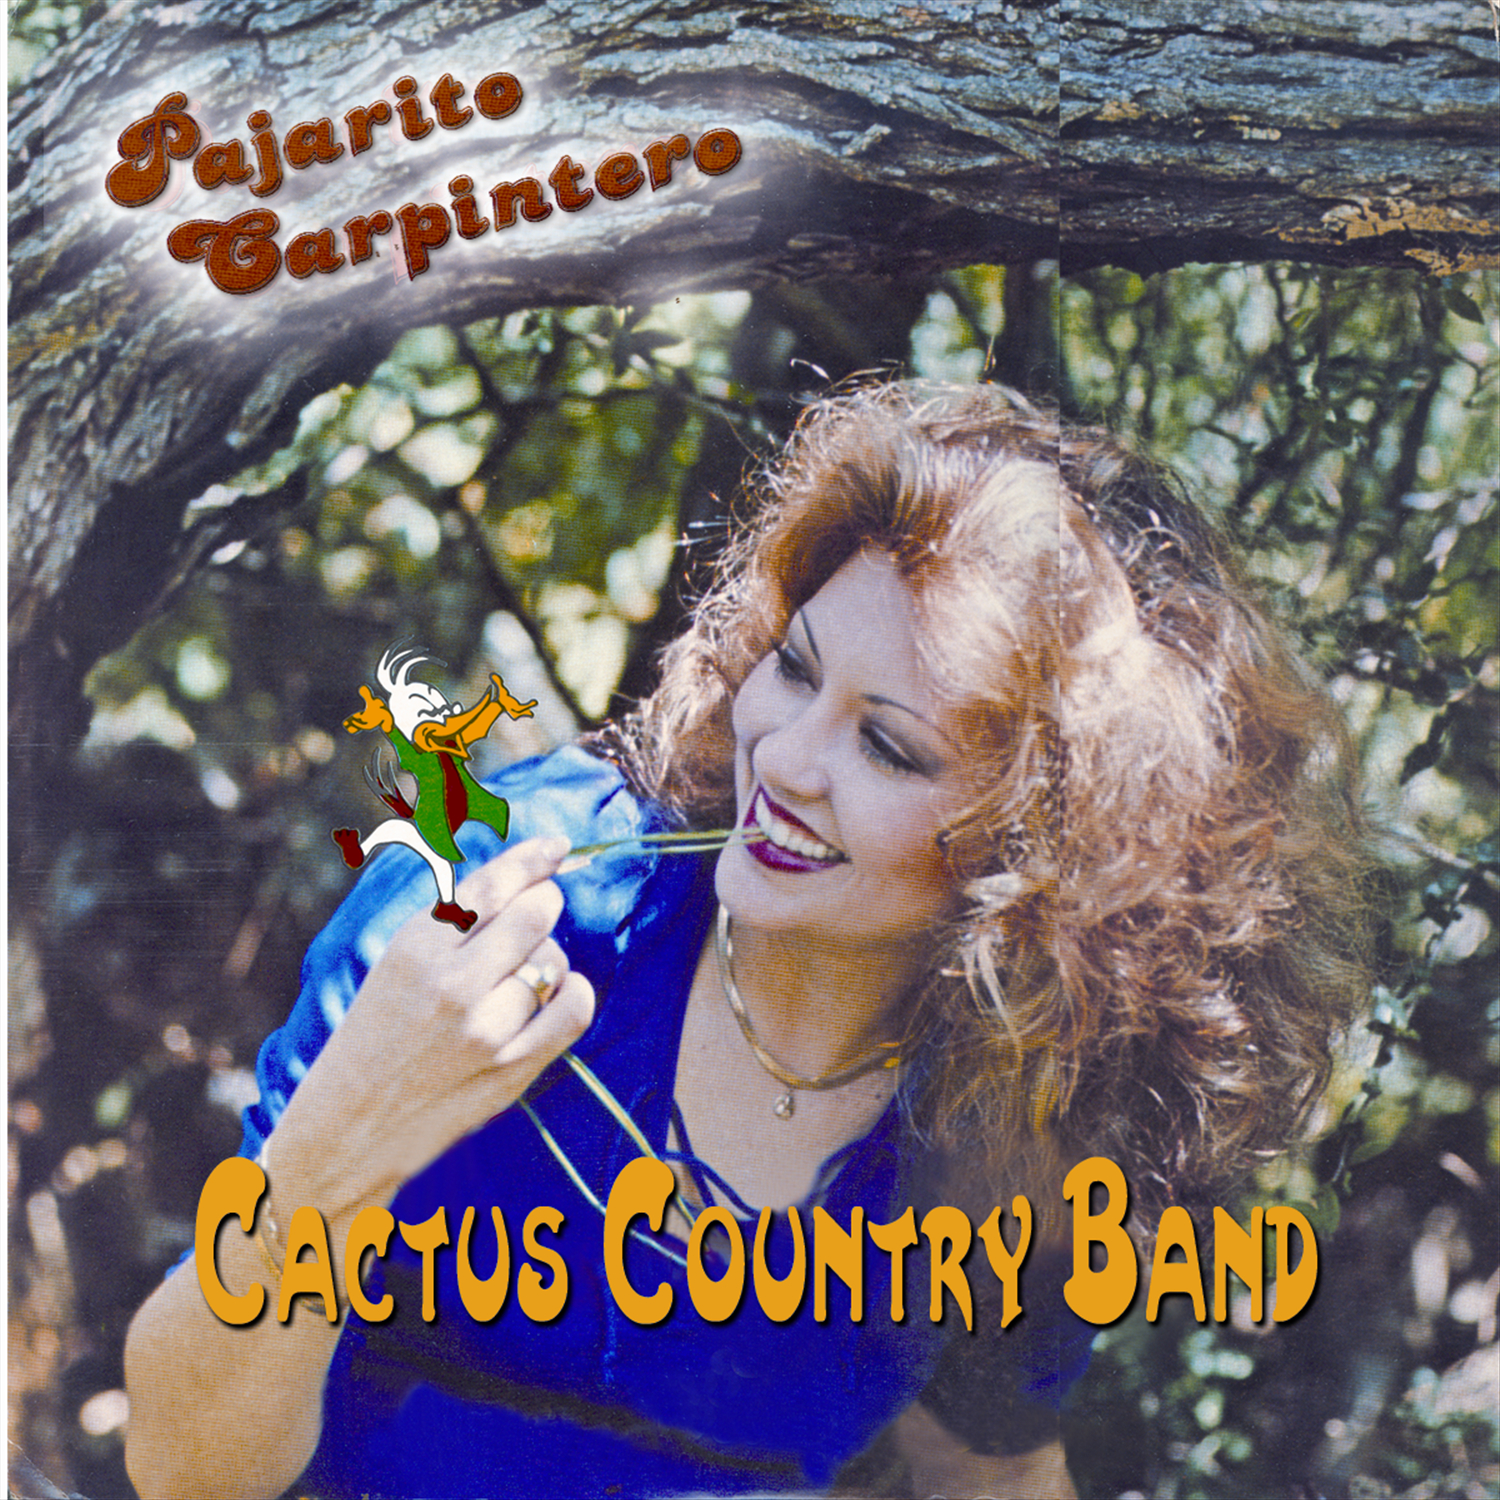 Cactus country band